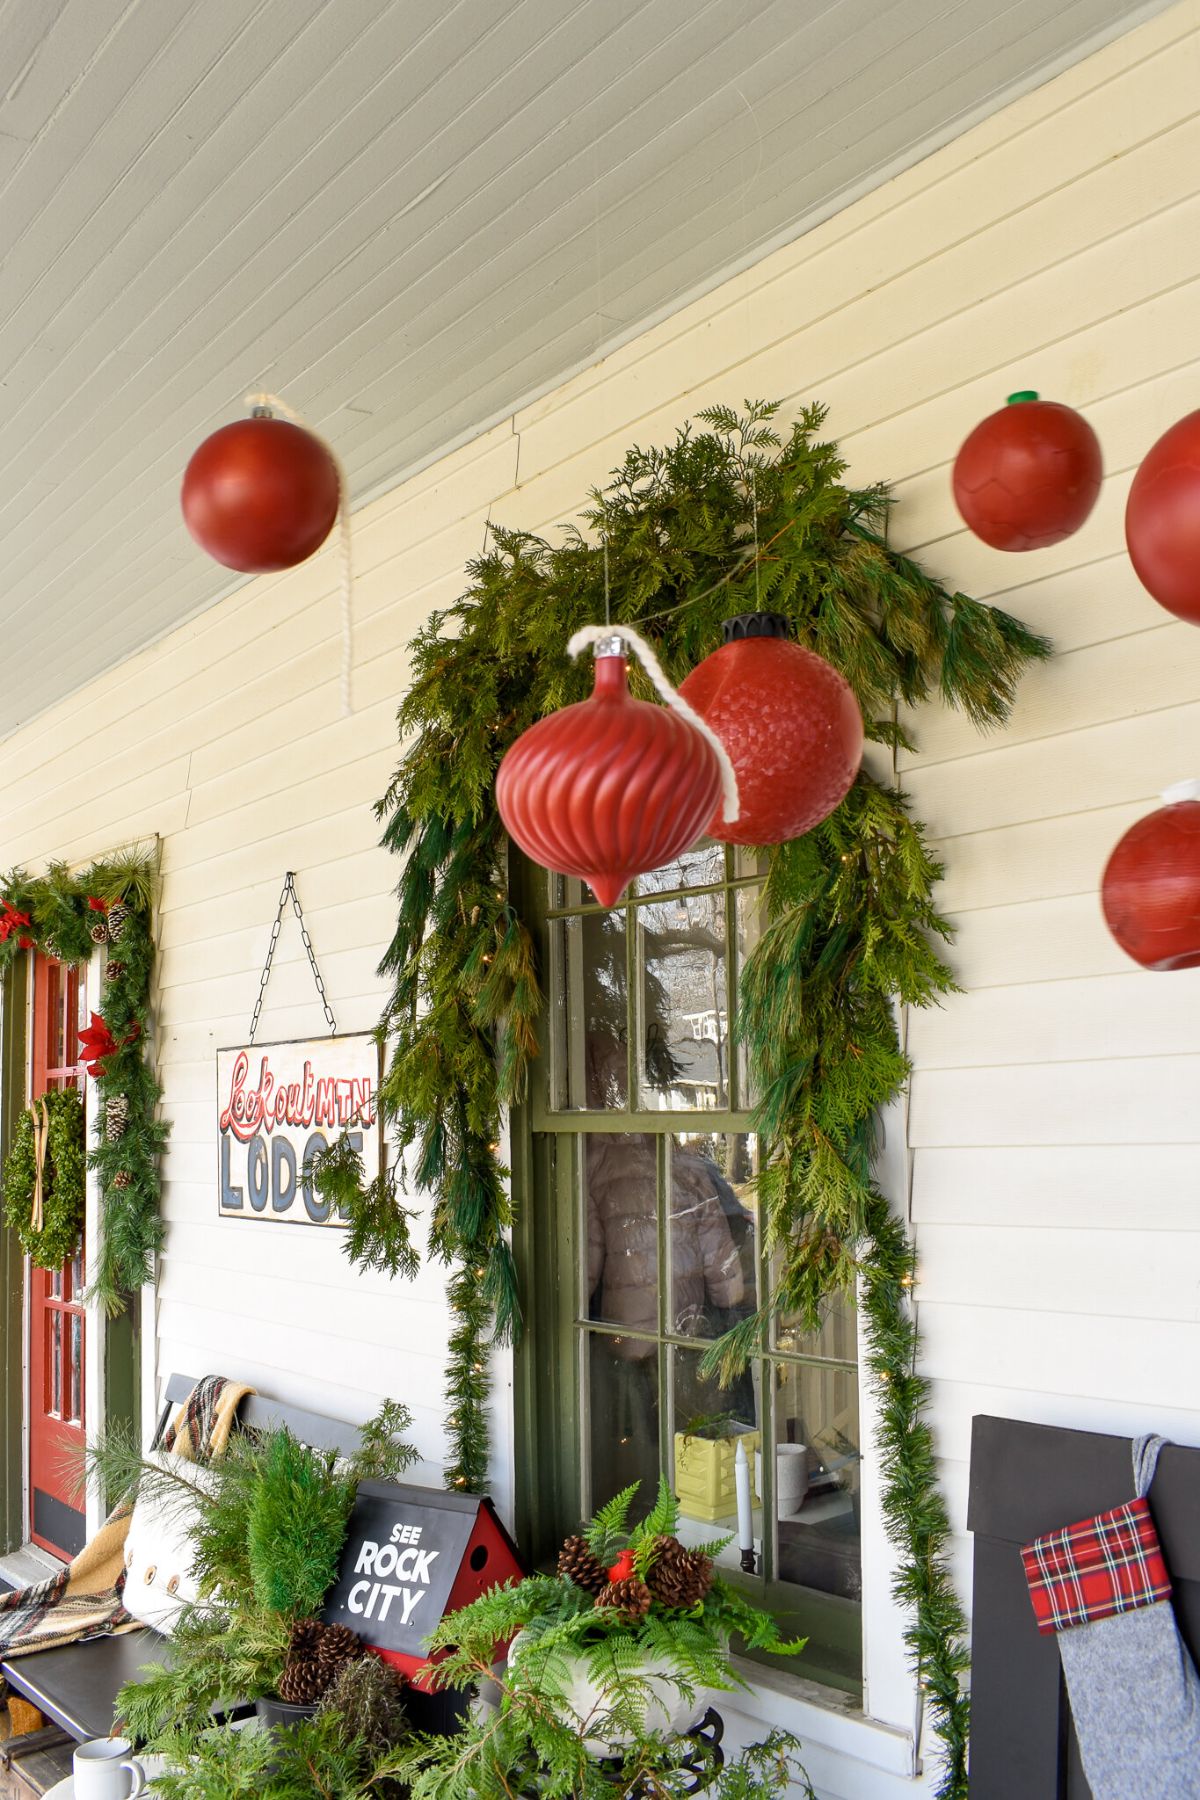 Christmas Porch Decorations: Oversized Ornament DIY (From Trash!)